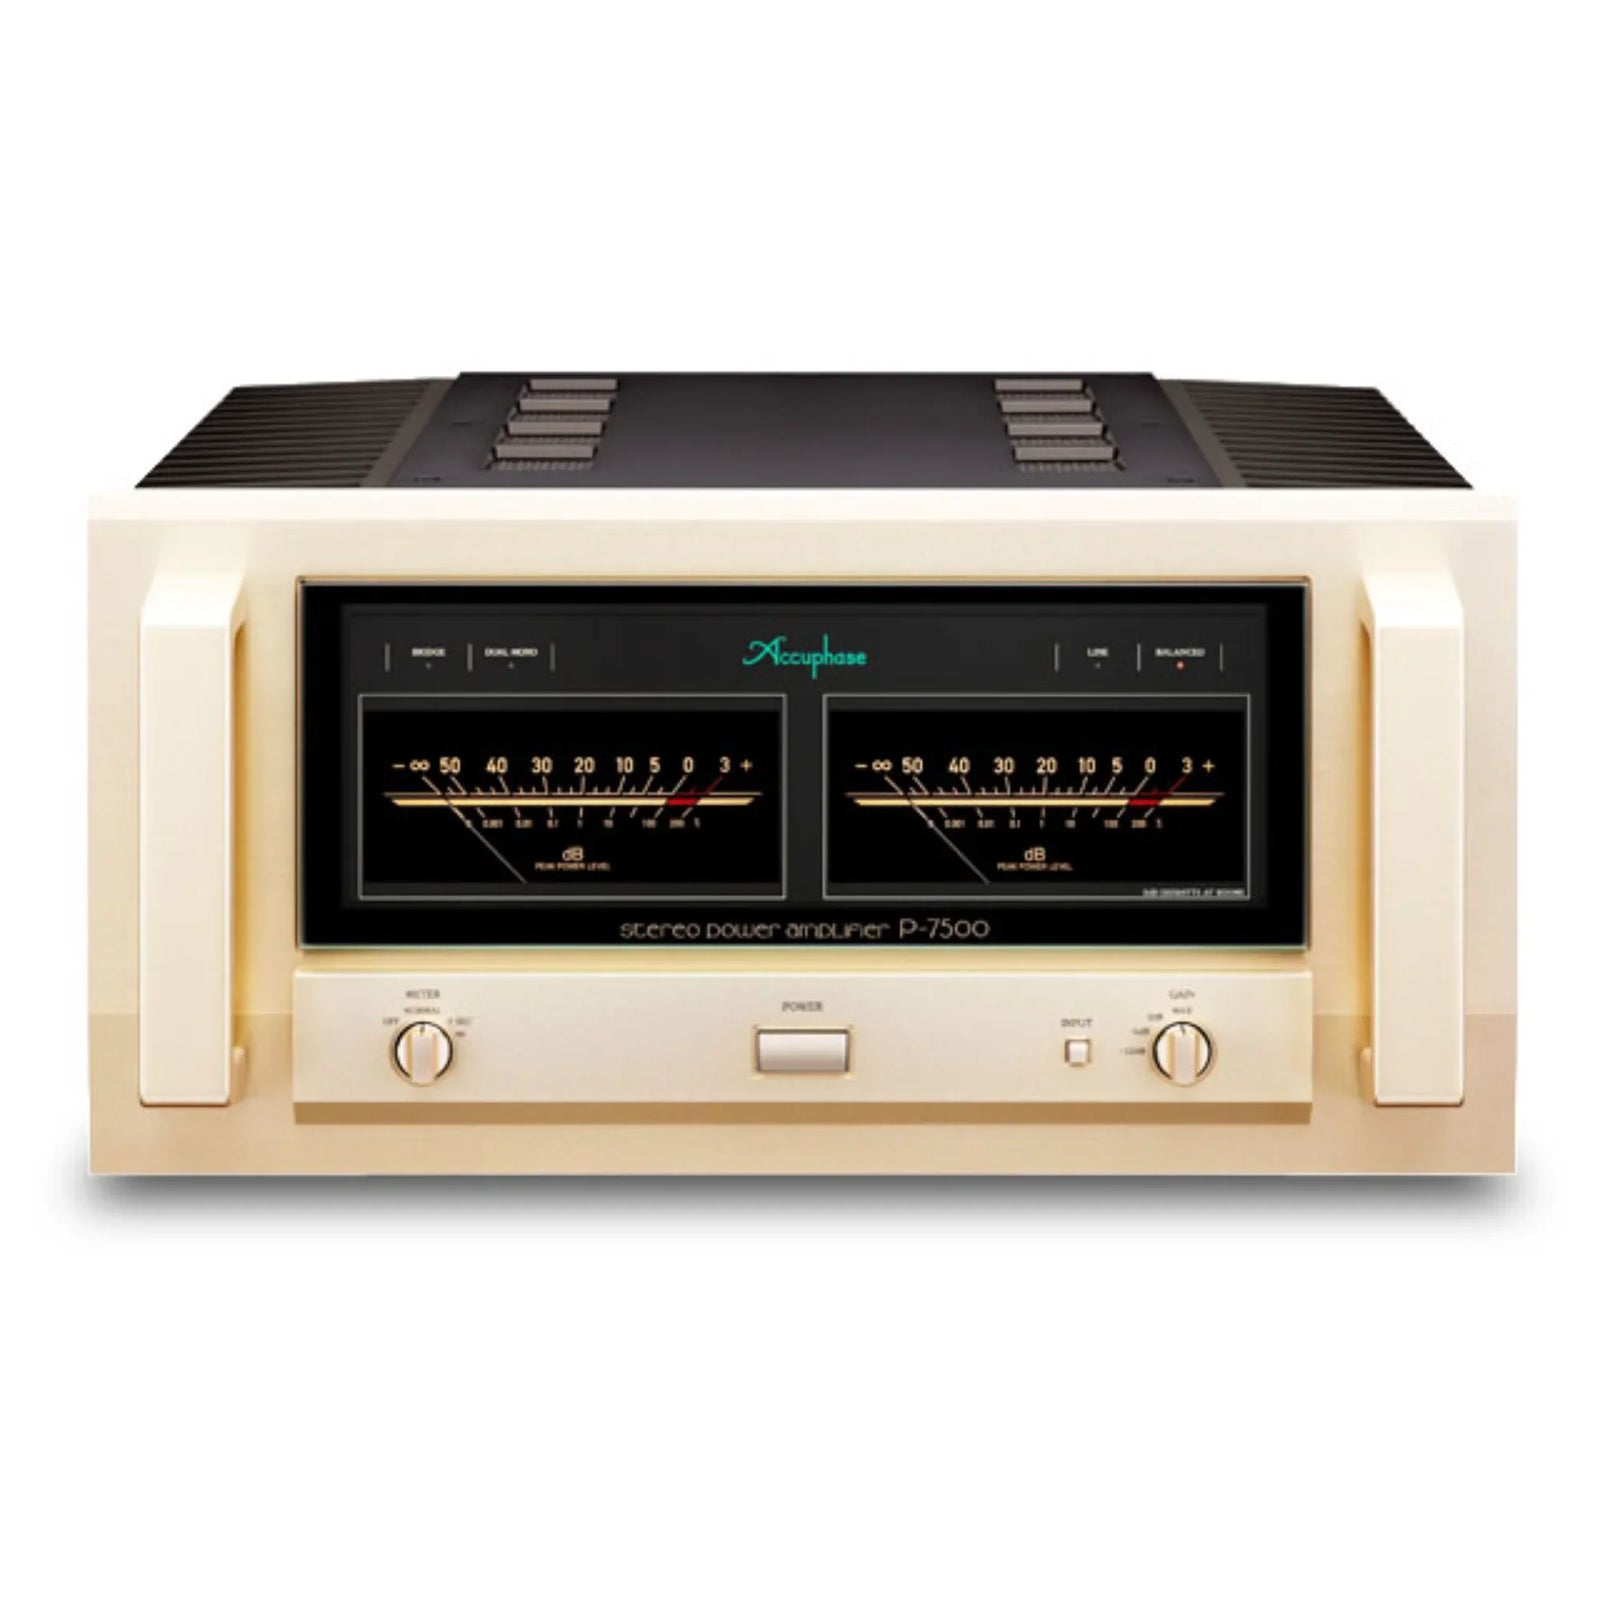 ACCUPHASE P-7500 POWER AMPLIFIER | VINYL SOUND USA Accuphase P-7500 Power Amplifier Product & Specification The P-7500 is our flagship model Class AB stereo power amplifier that provides supreme driving performance. The power amplification stage uses a 10-parallel push-pull power transistor architecture, providing a rated output power of 300 W / 8 ohms that vastly exceeds that of conventional models.